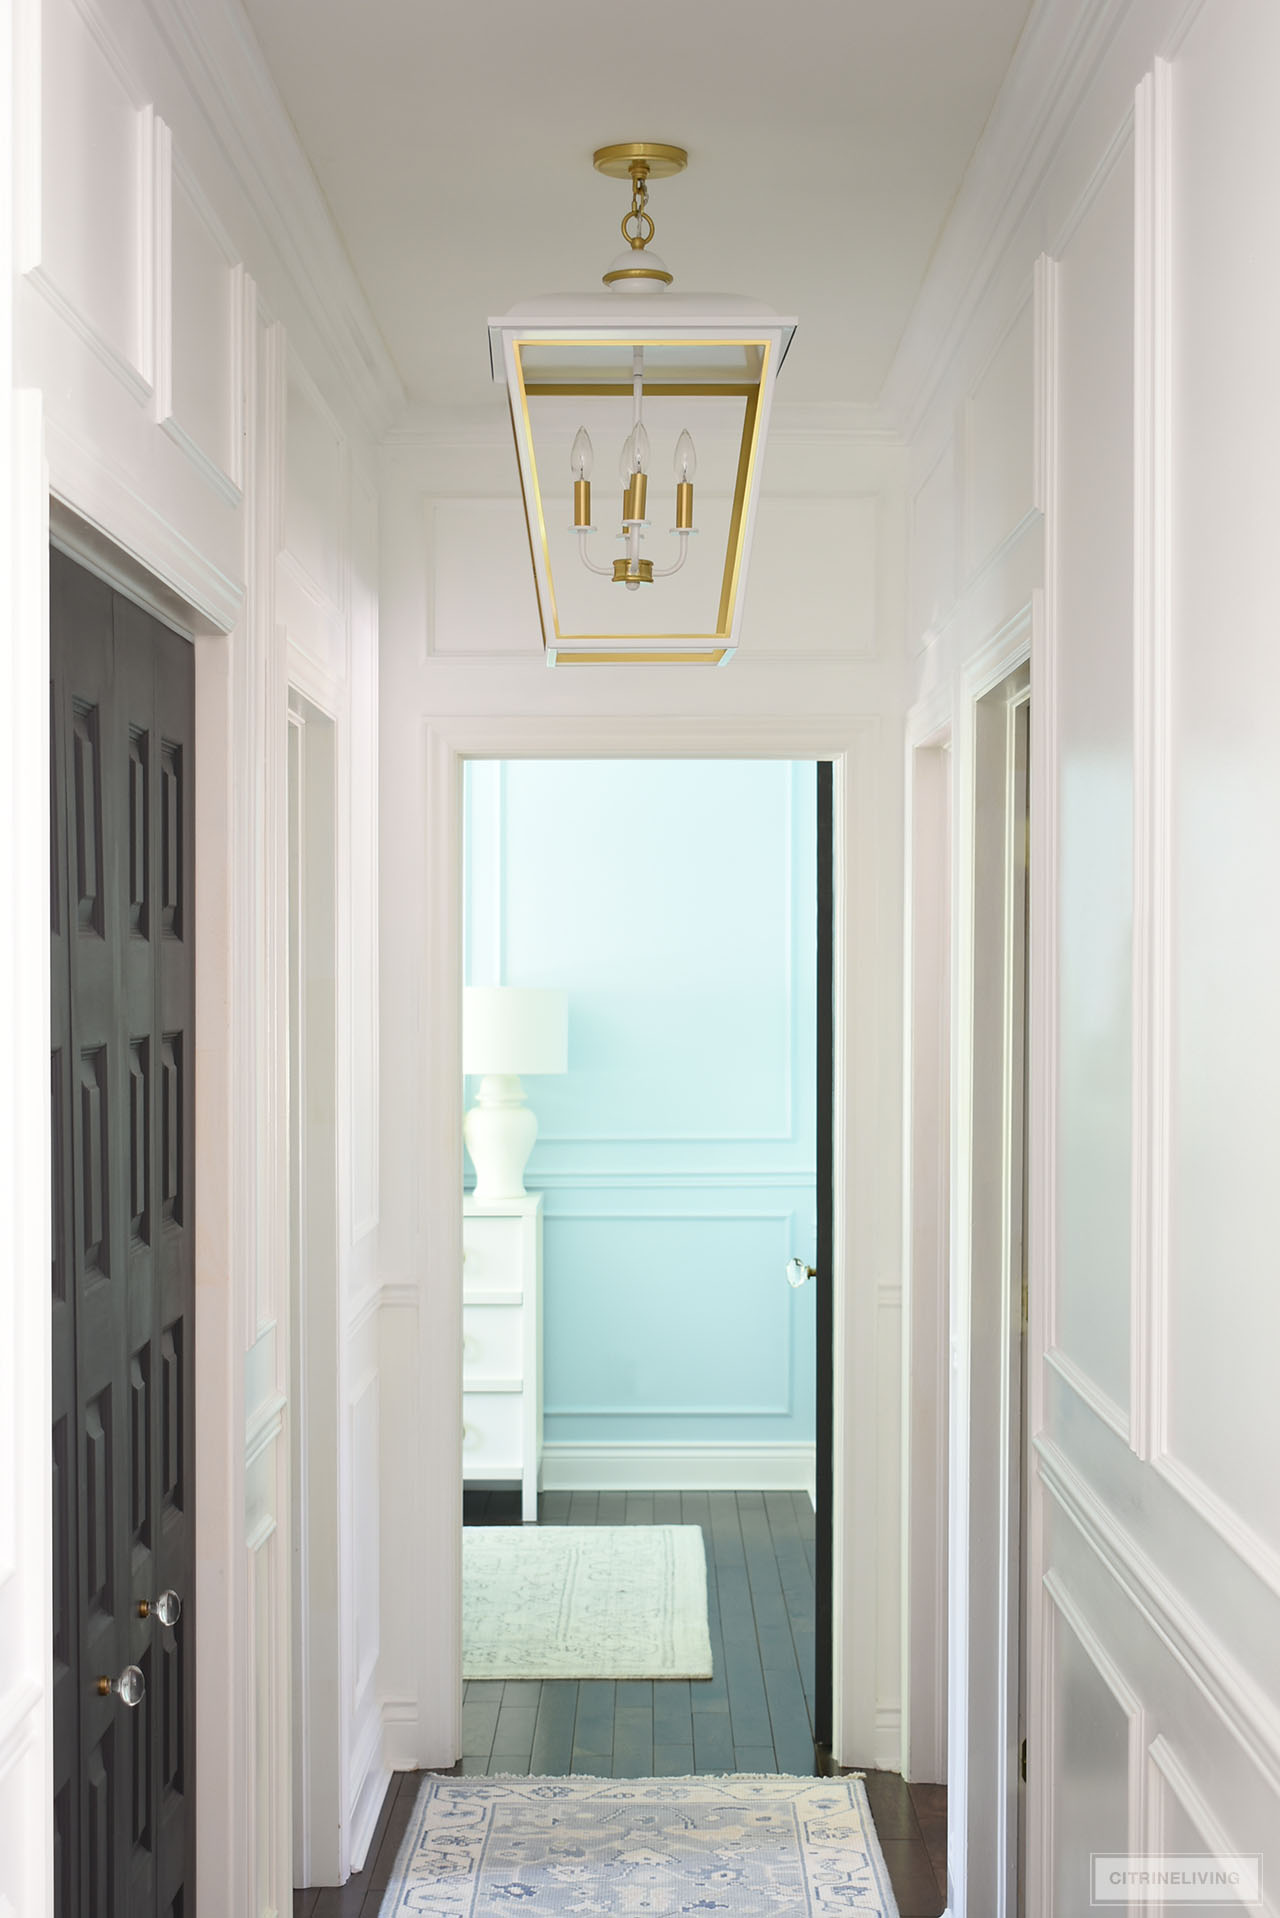 An oversized lantern pendant light in white and gold hangs in a small hallway painted Ultra Pure White by Behr.